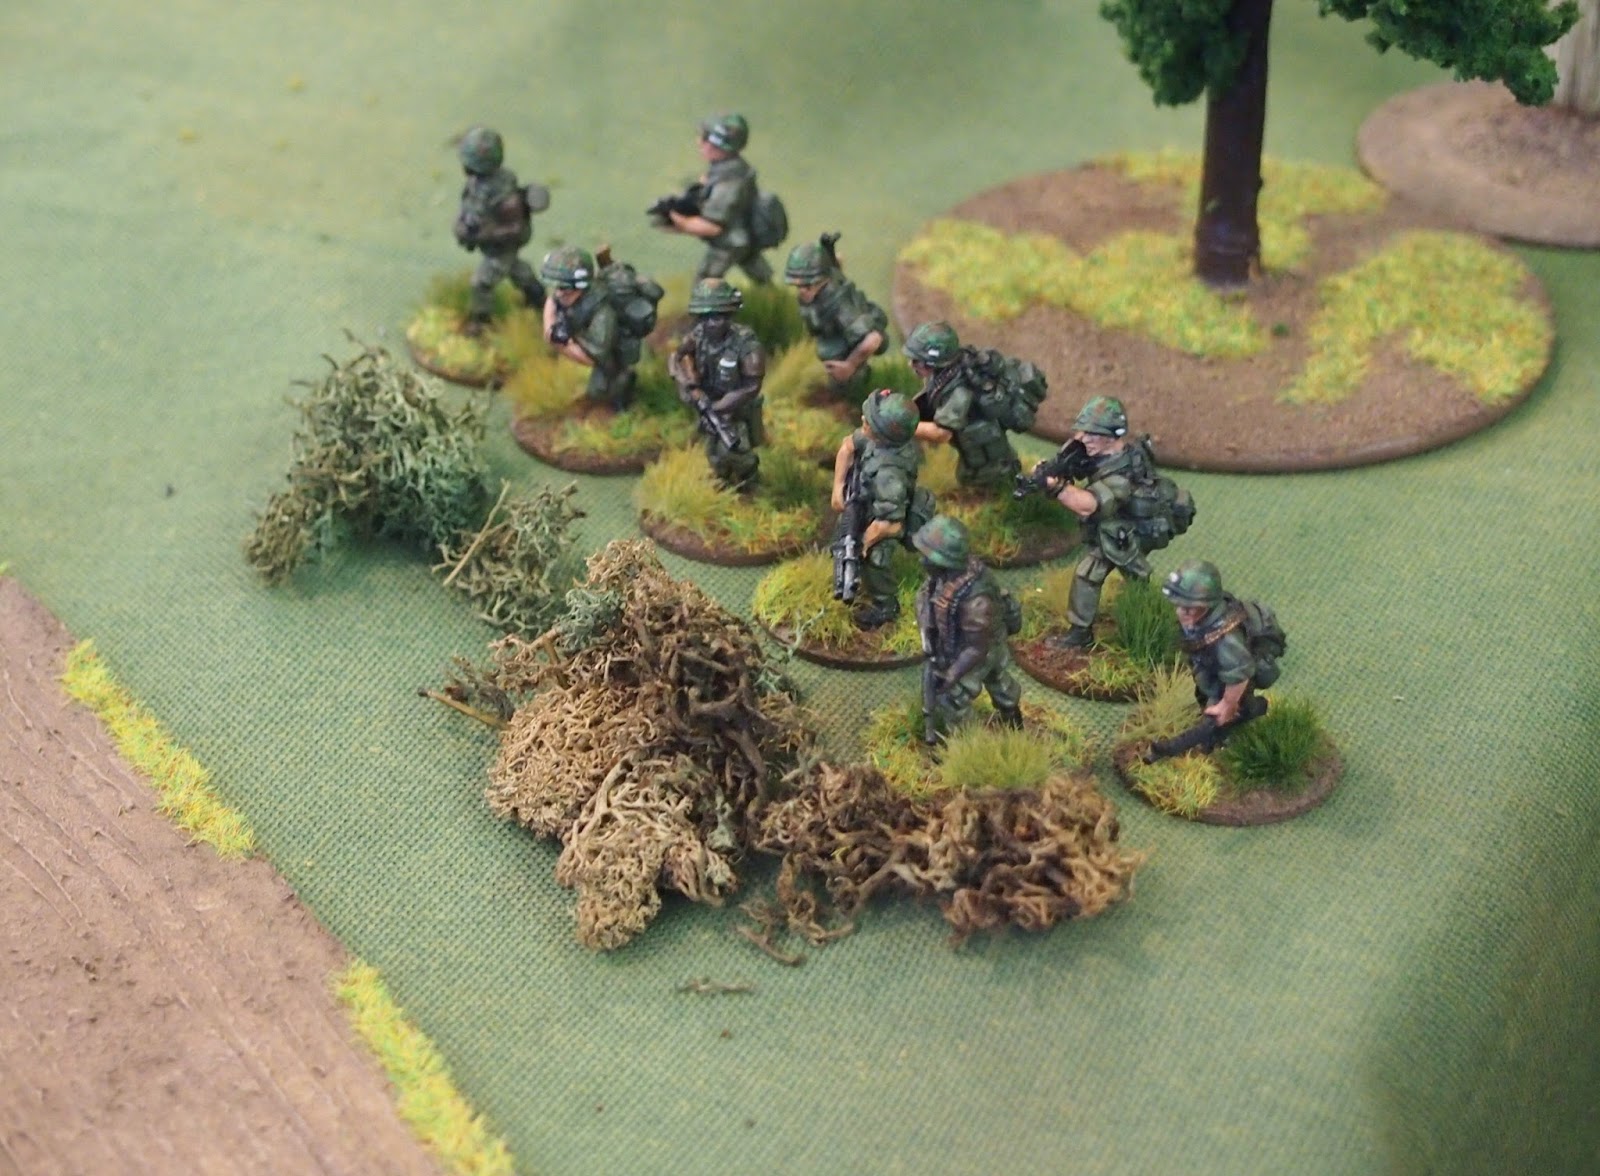 US 2nd platoon section three finally arrived and set up a defensive line